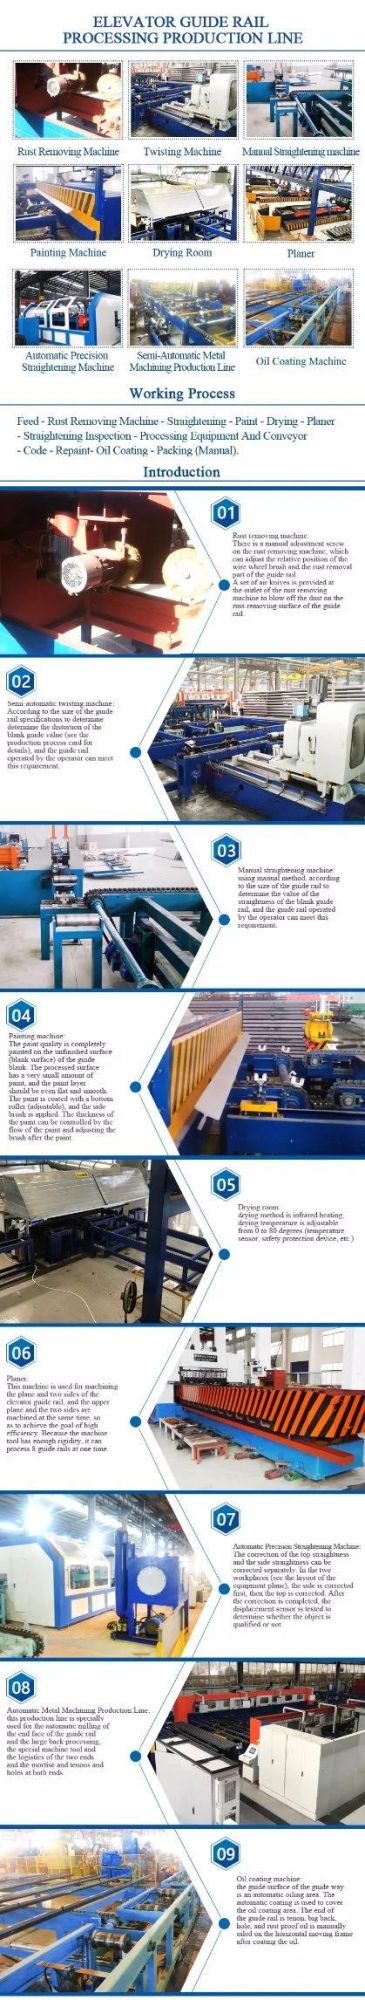 T Shaped Popular Customized High Capacity Elevator Guide Rail Roll Forming/Making Machine